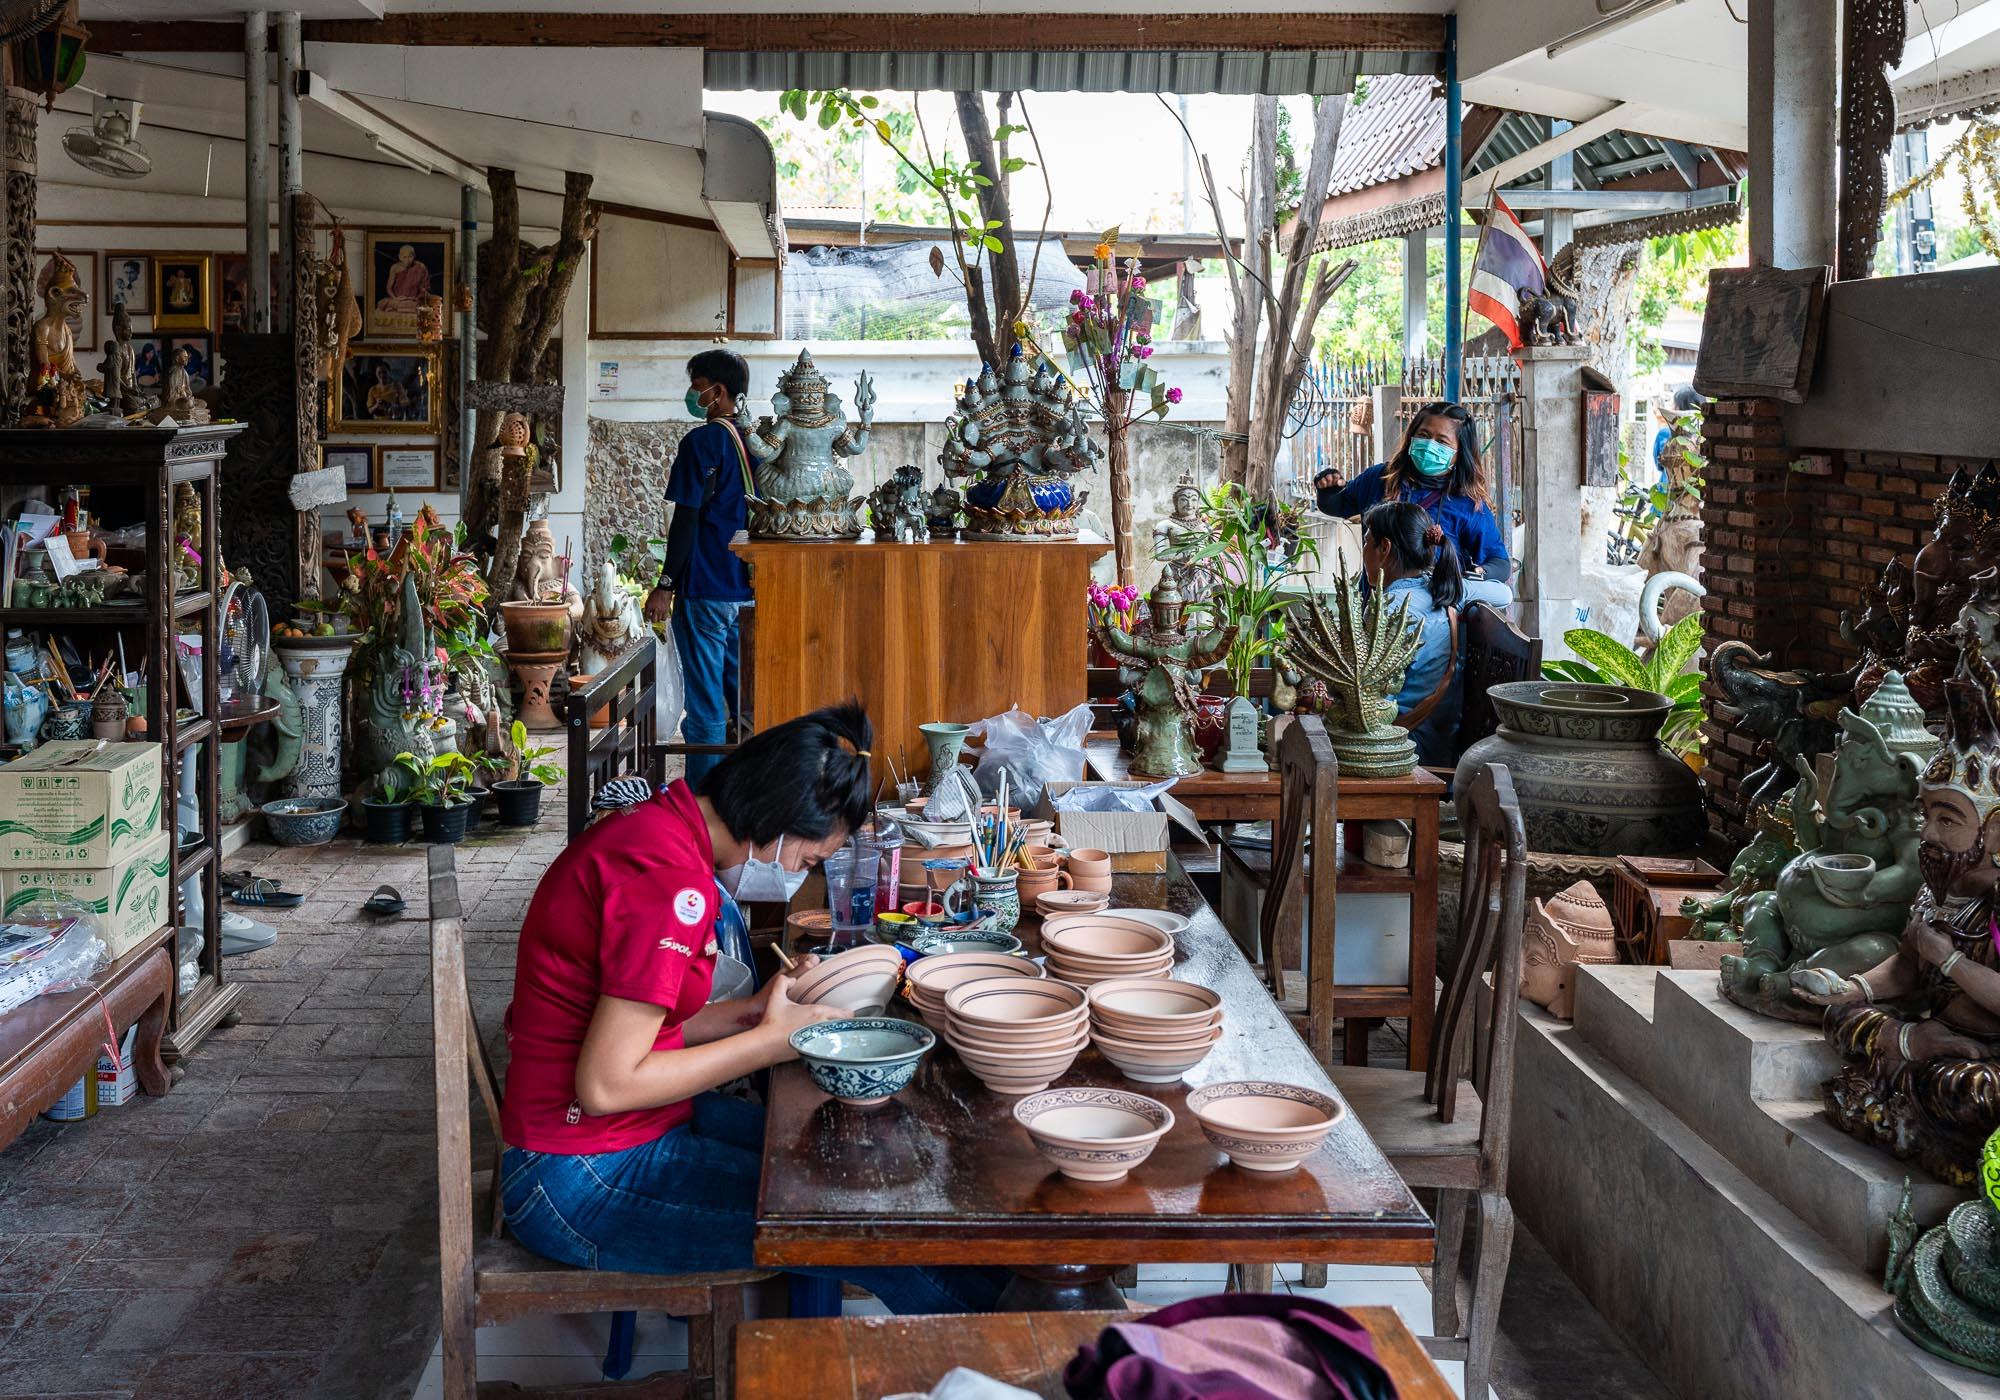 The workshop at Suthep Sangkhalok, where visitors can paint their own ceramic products. – © Michael Turtle